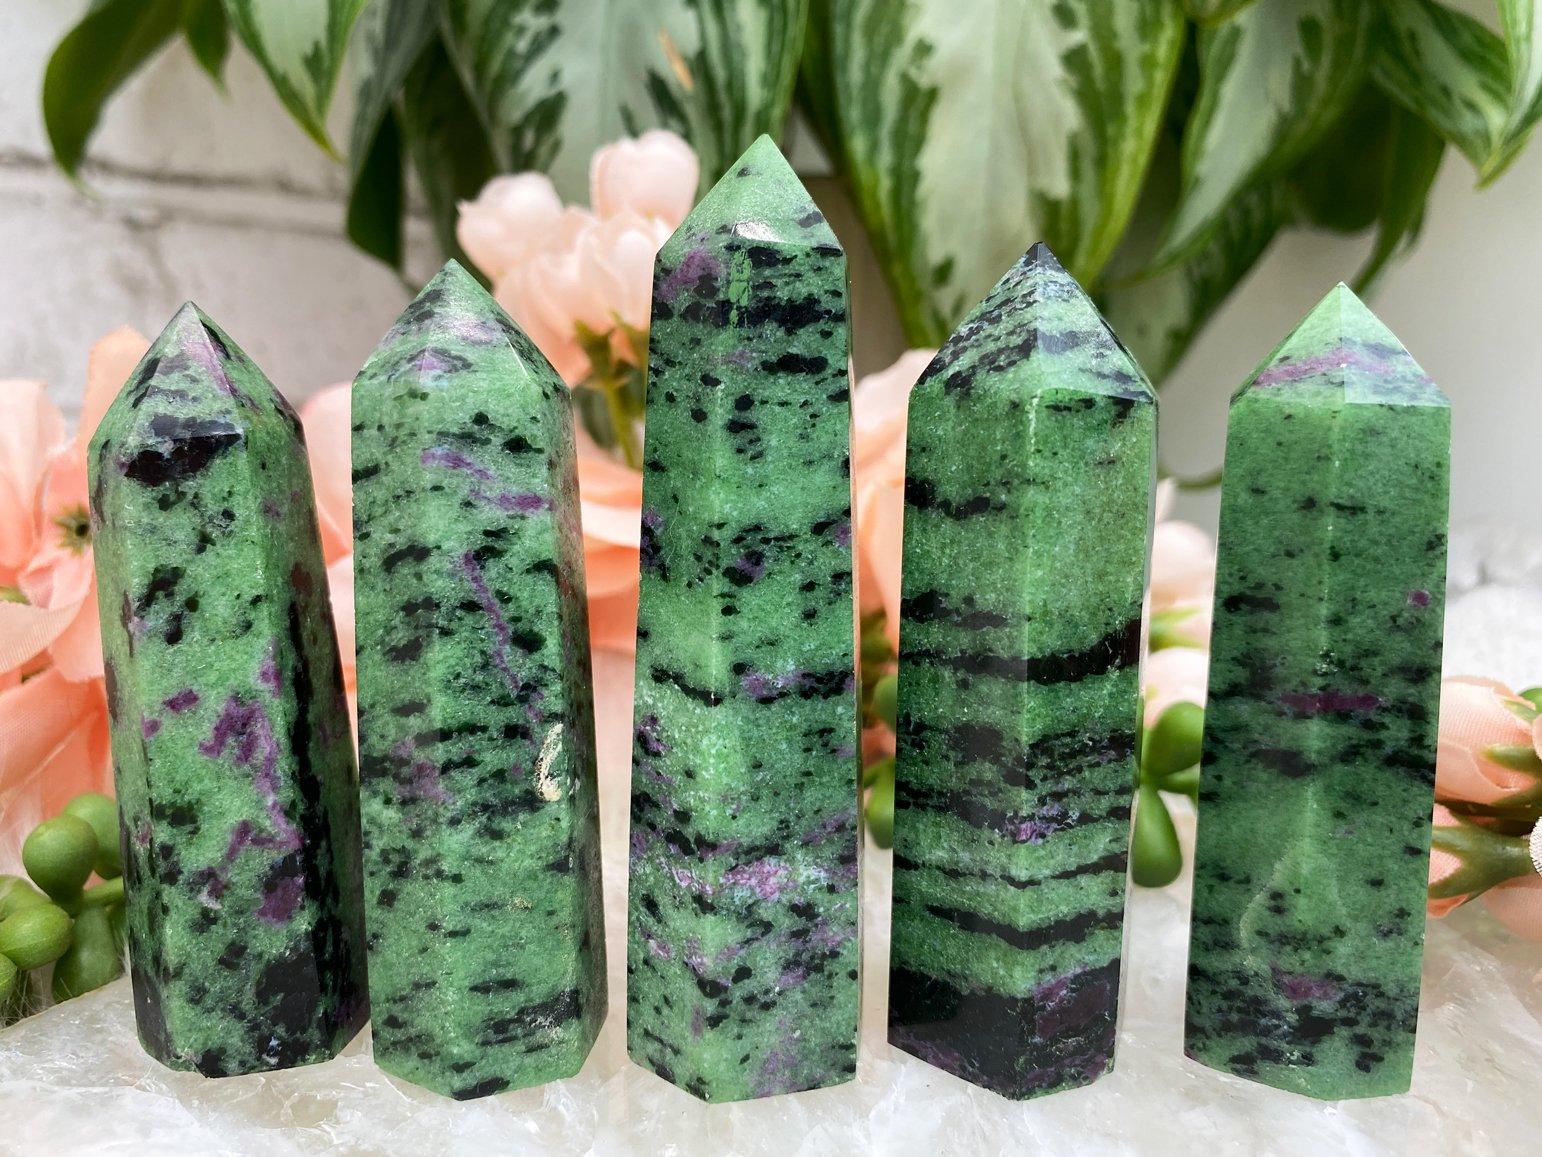 Five ruby zoisite as a display infront of the flowers